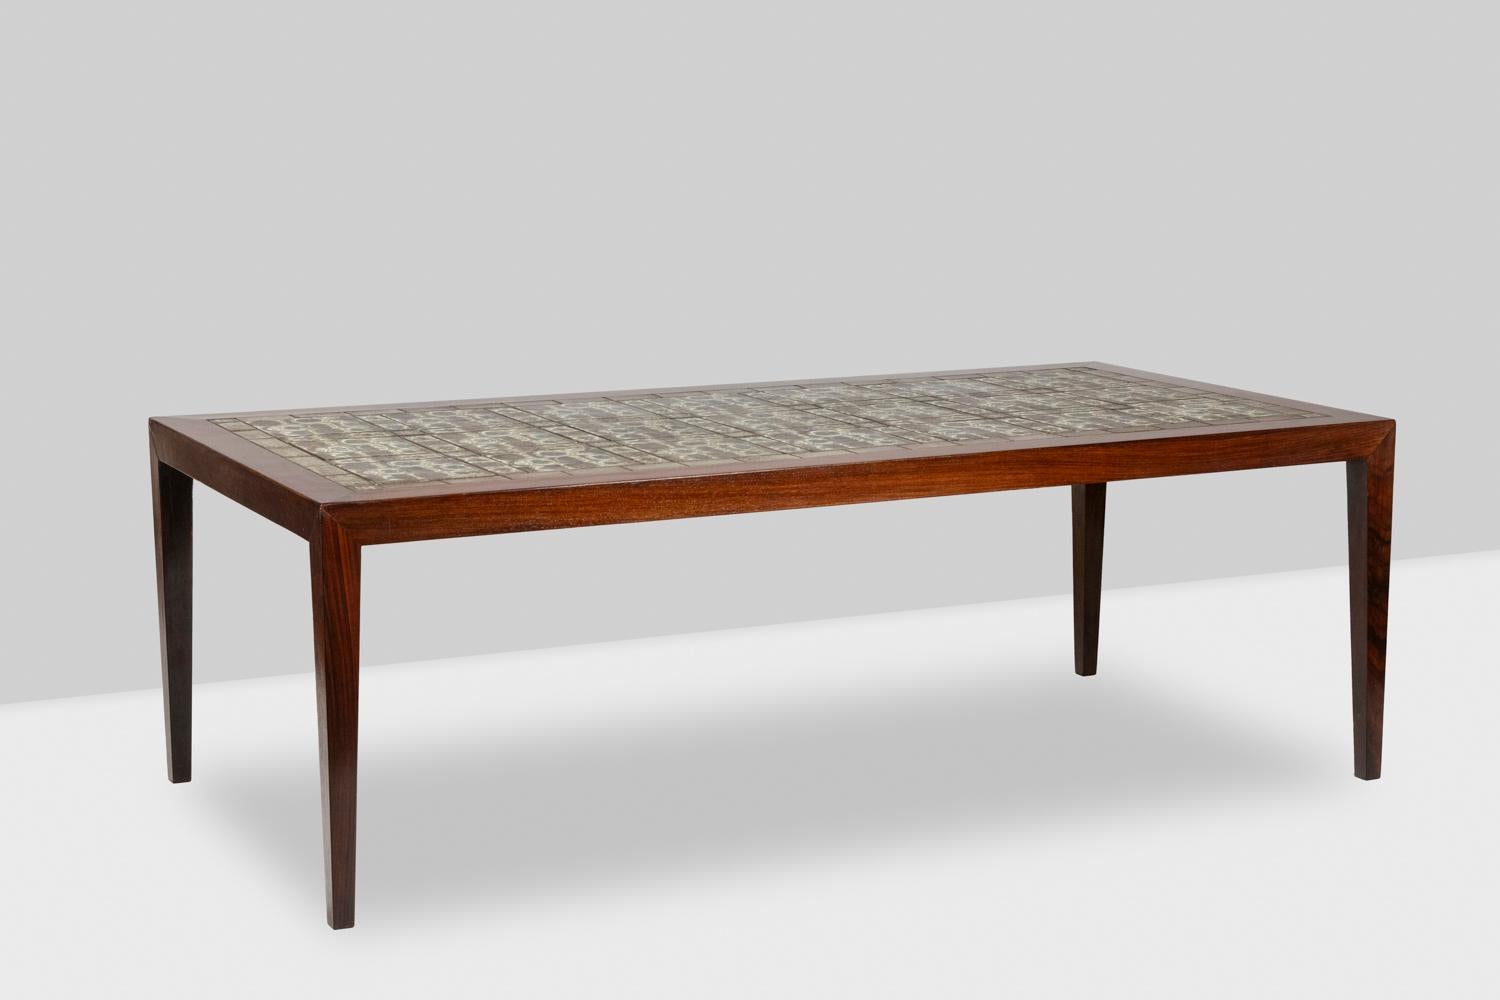 Severin Hansen for Haslev Mobelsnedkeri.
Royal Copenhagen Denmark, stamped.

Coffee table in a rectangular shape, with its Baca pattern ceramic top and its rosewood base.

Danish work realized in the 1960s.

Reference: LS5870837D